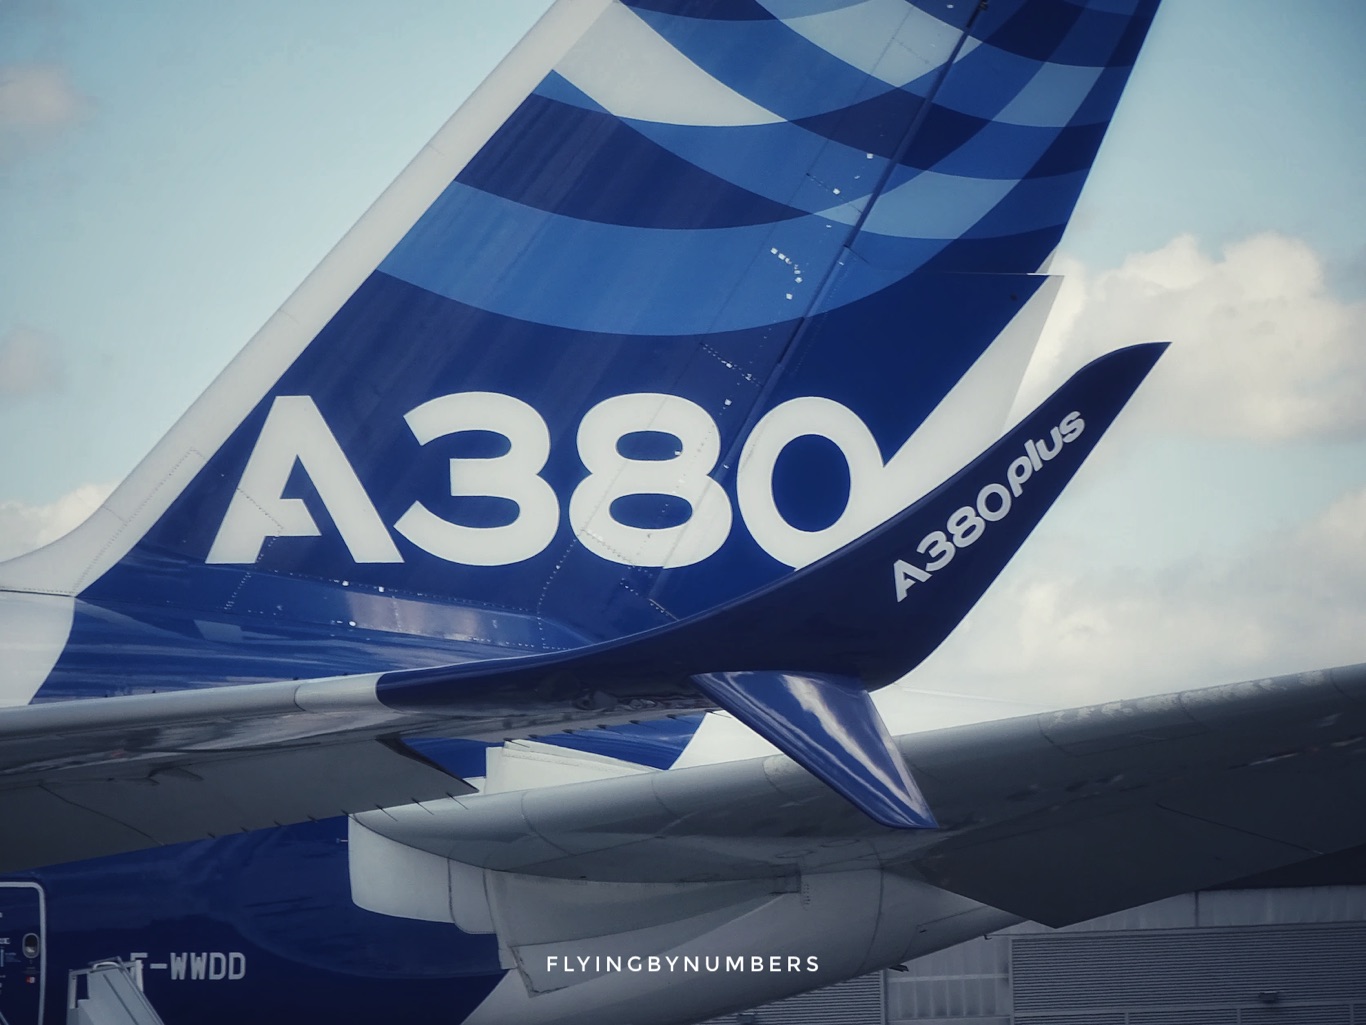 Airbus’s scrapped A380 plus project never got off the ground